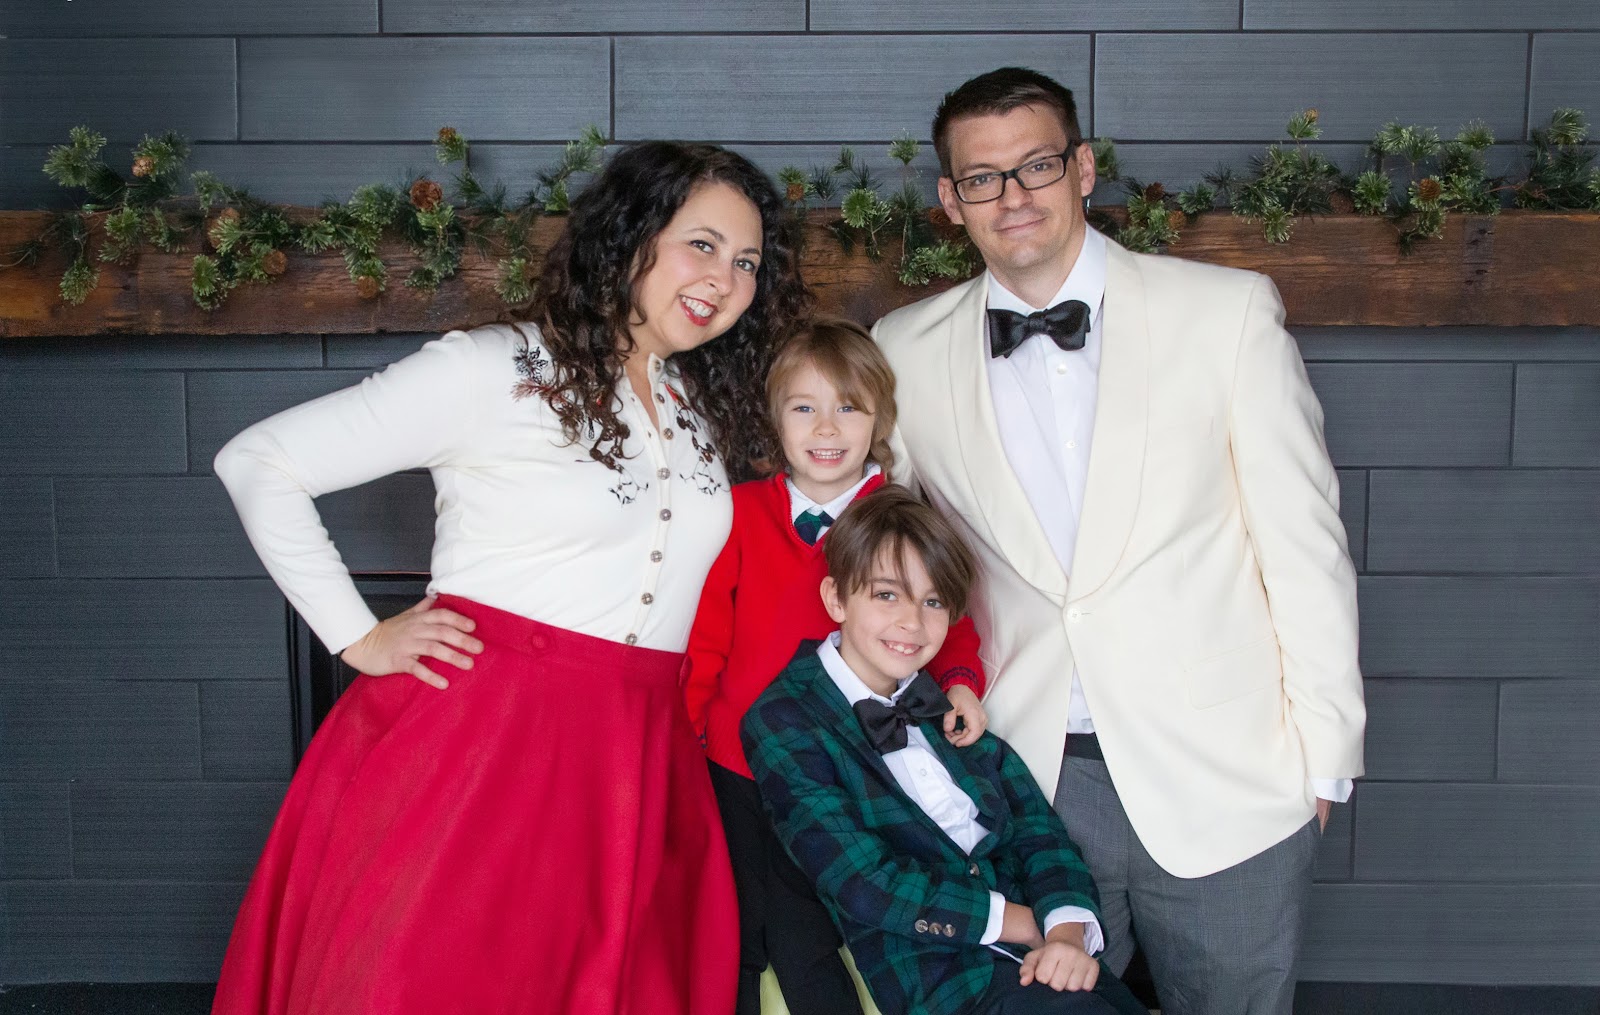 fun christmas card pose of family in formal christmas clothes for a holiday card